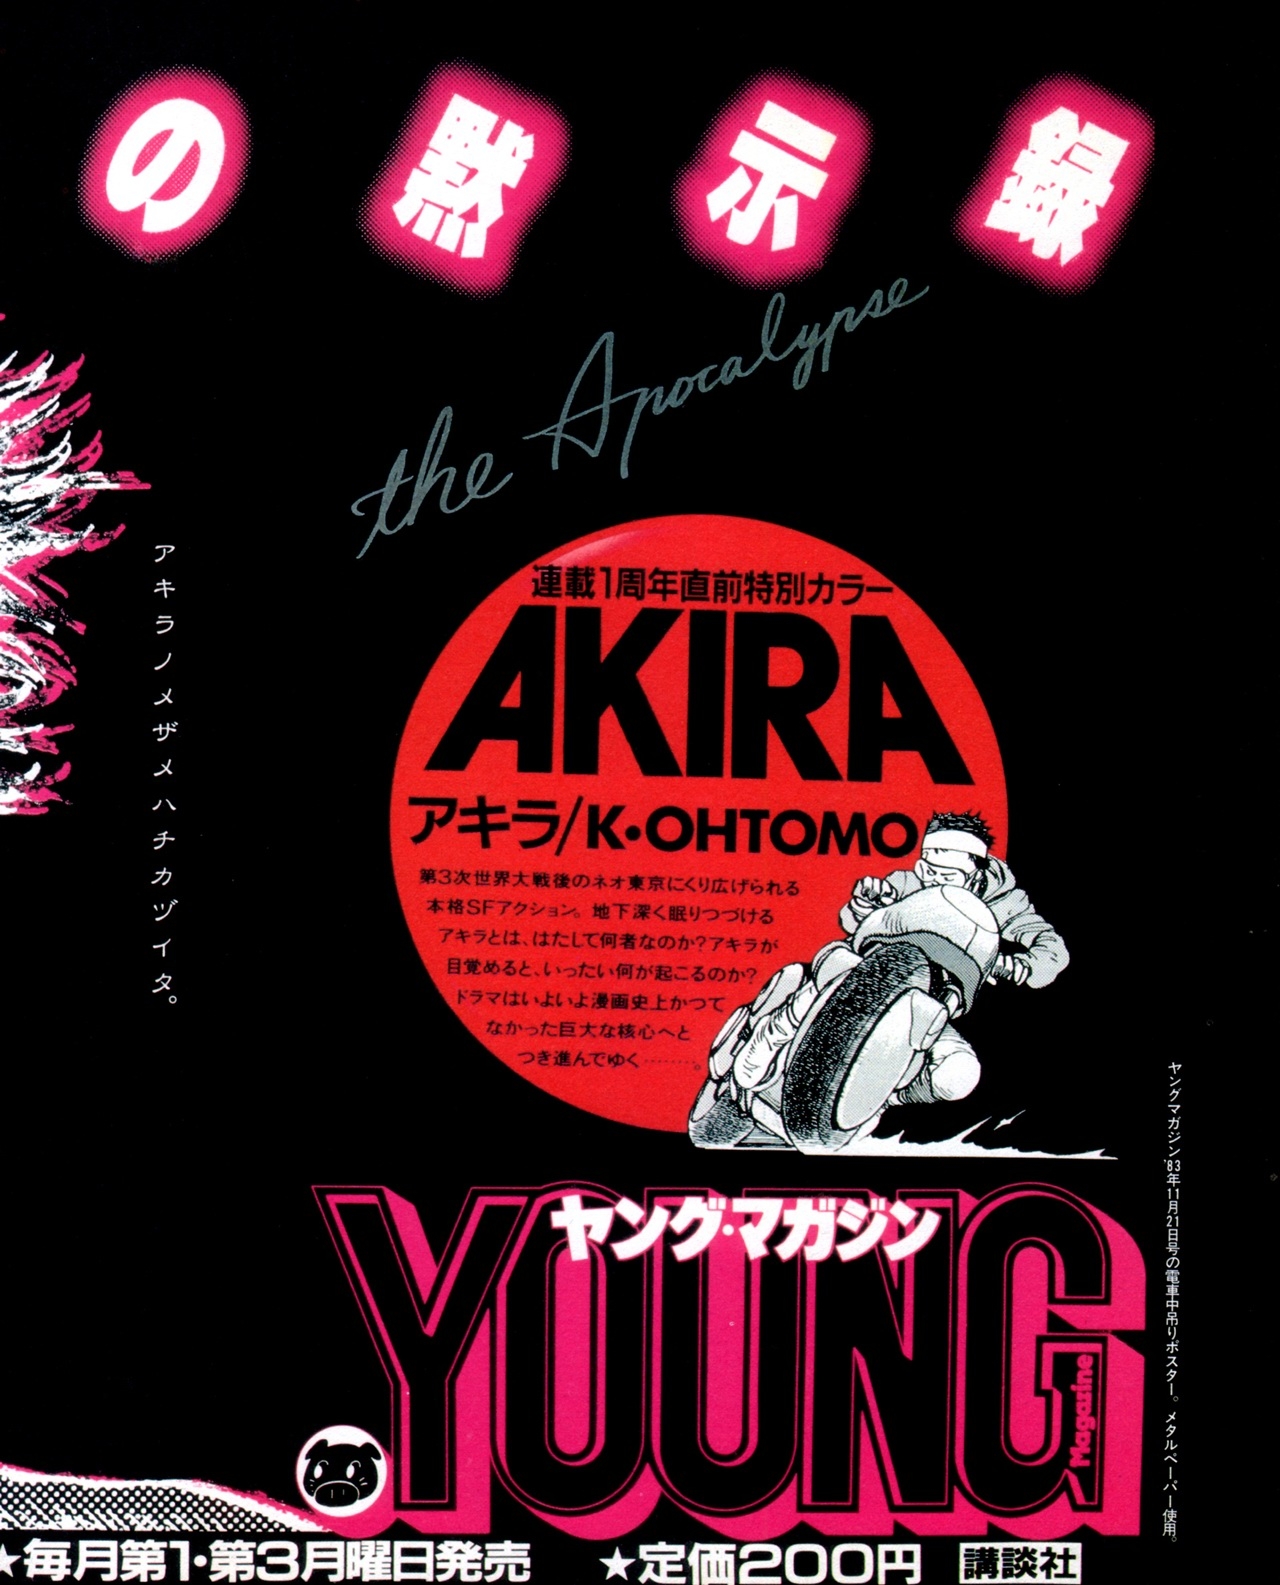 Akira club - The memory of Akira lives on in our hearts! 191